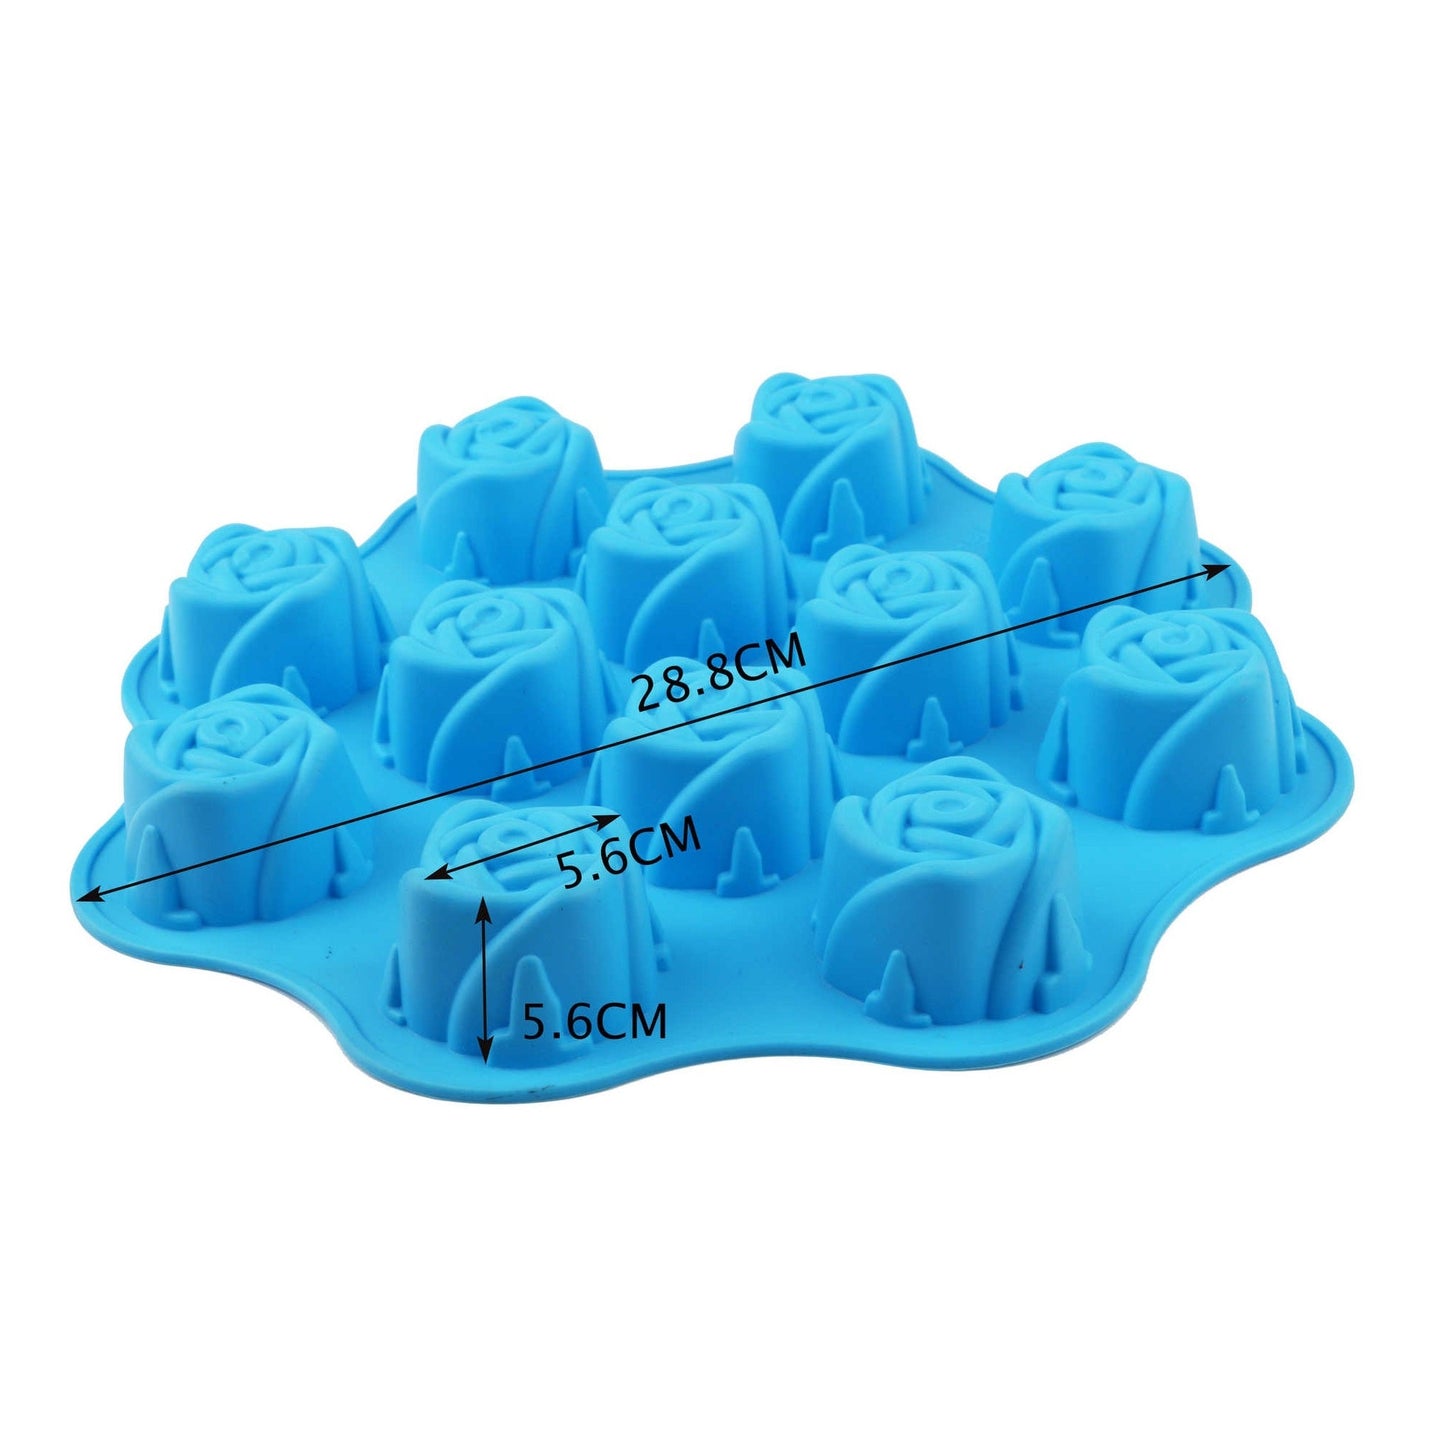 Rose Flower Silicone Mousse Cake Mold 12 Cavity